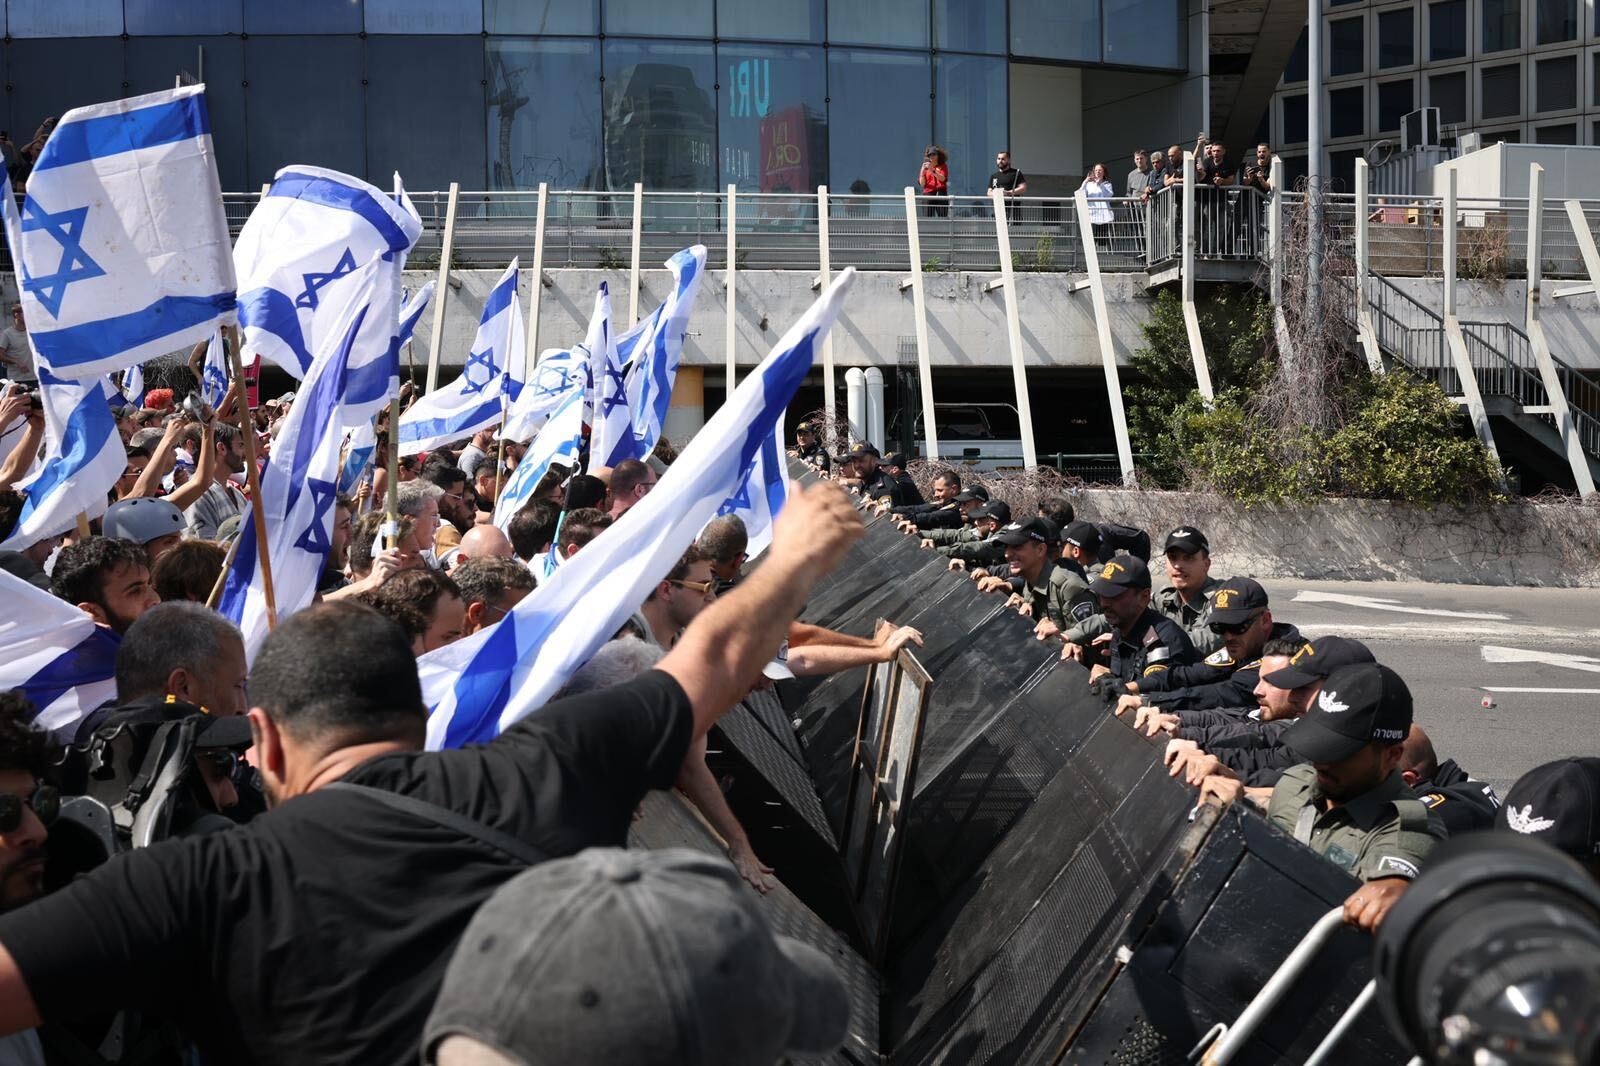 Israeli police block protesters from advancing at a Tel Aviv road on 1 March 2023 (MEE/Oren Ziv)